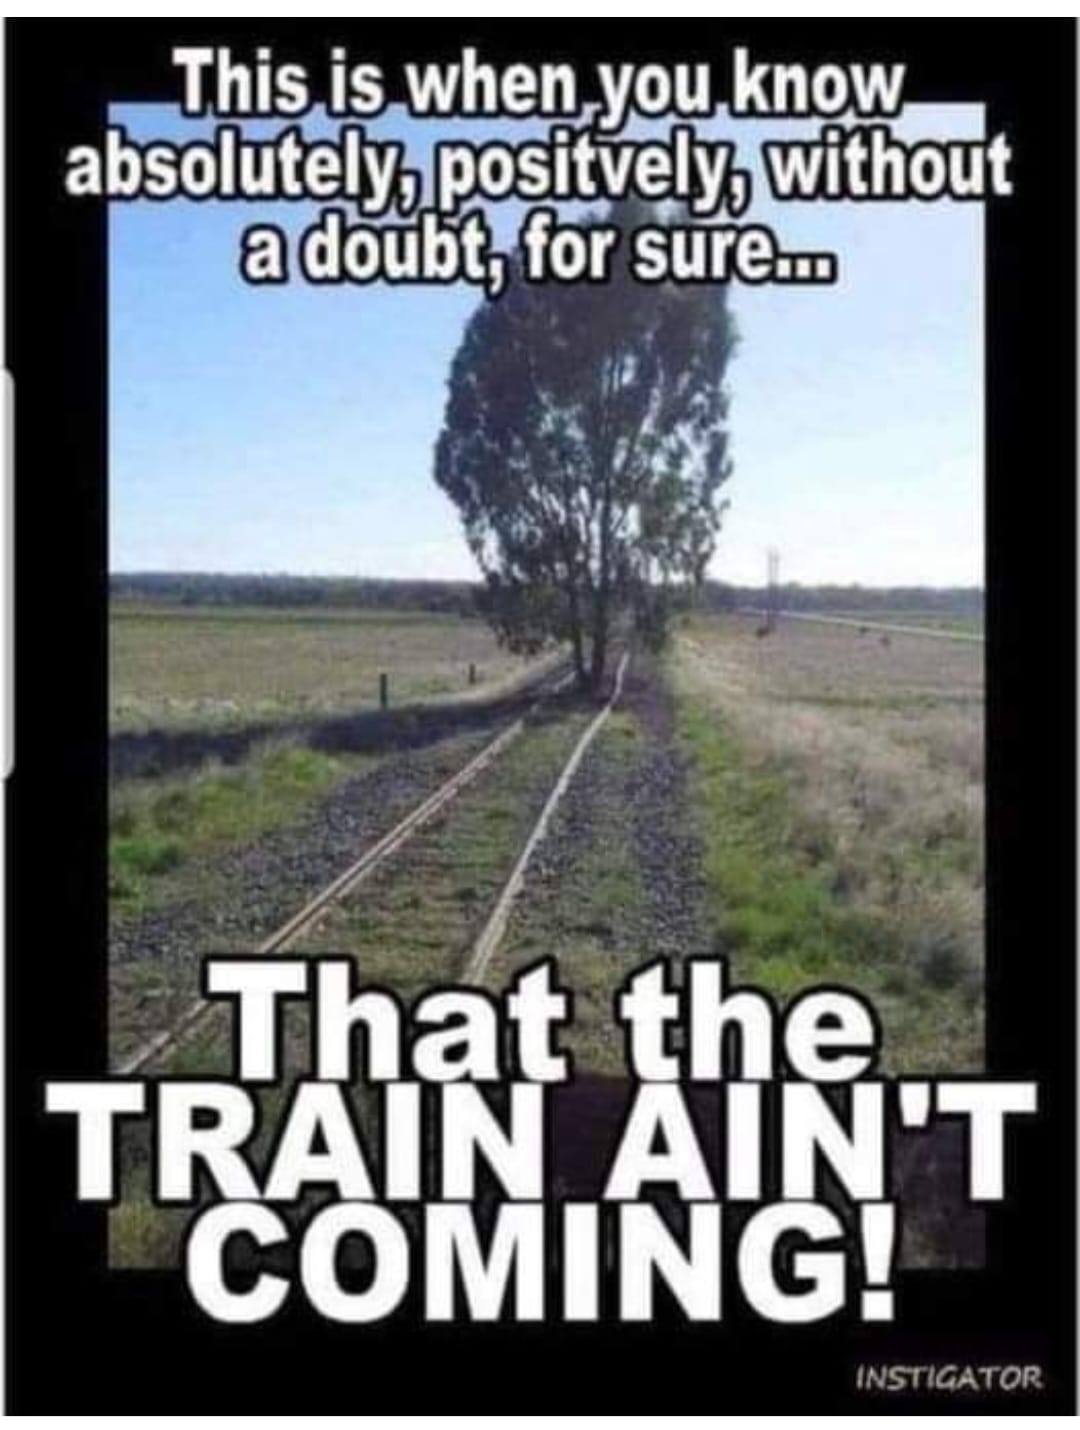 redneck memes and pics - railfan memes - This is when you know absolutely, positvely, without a doubt, for sure... That the Train Ain'T Coming! Instigator